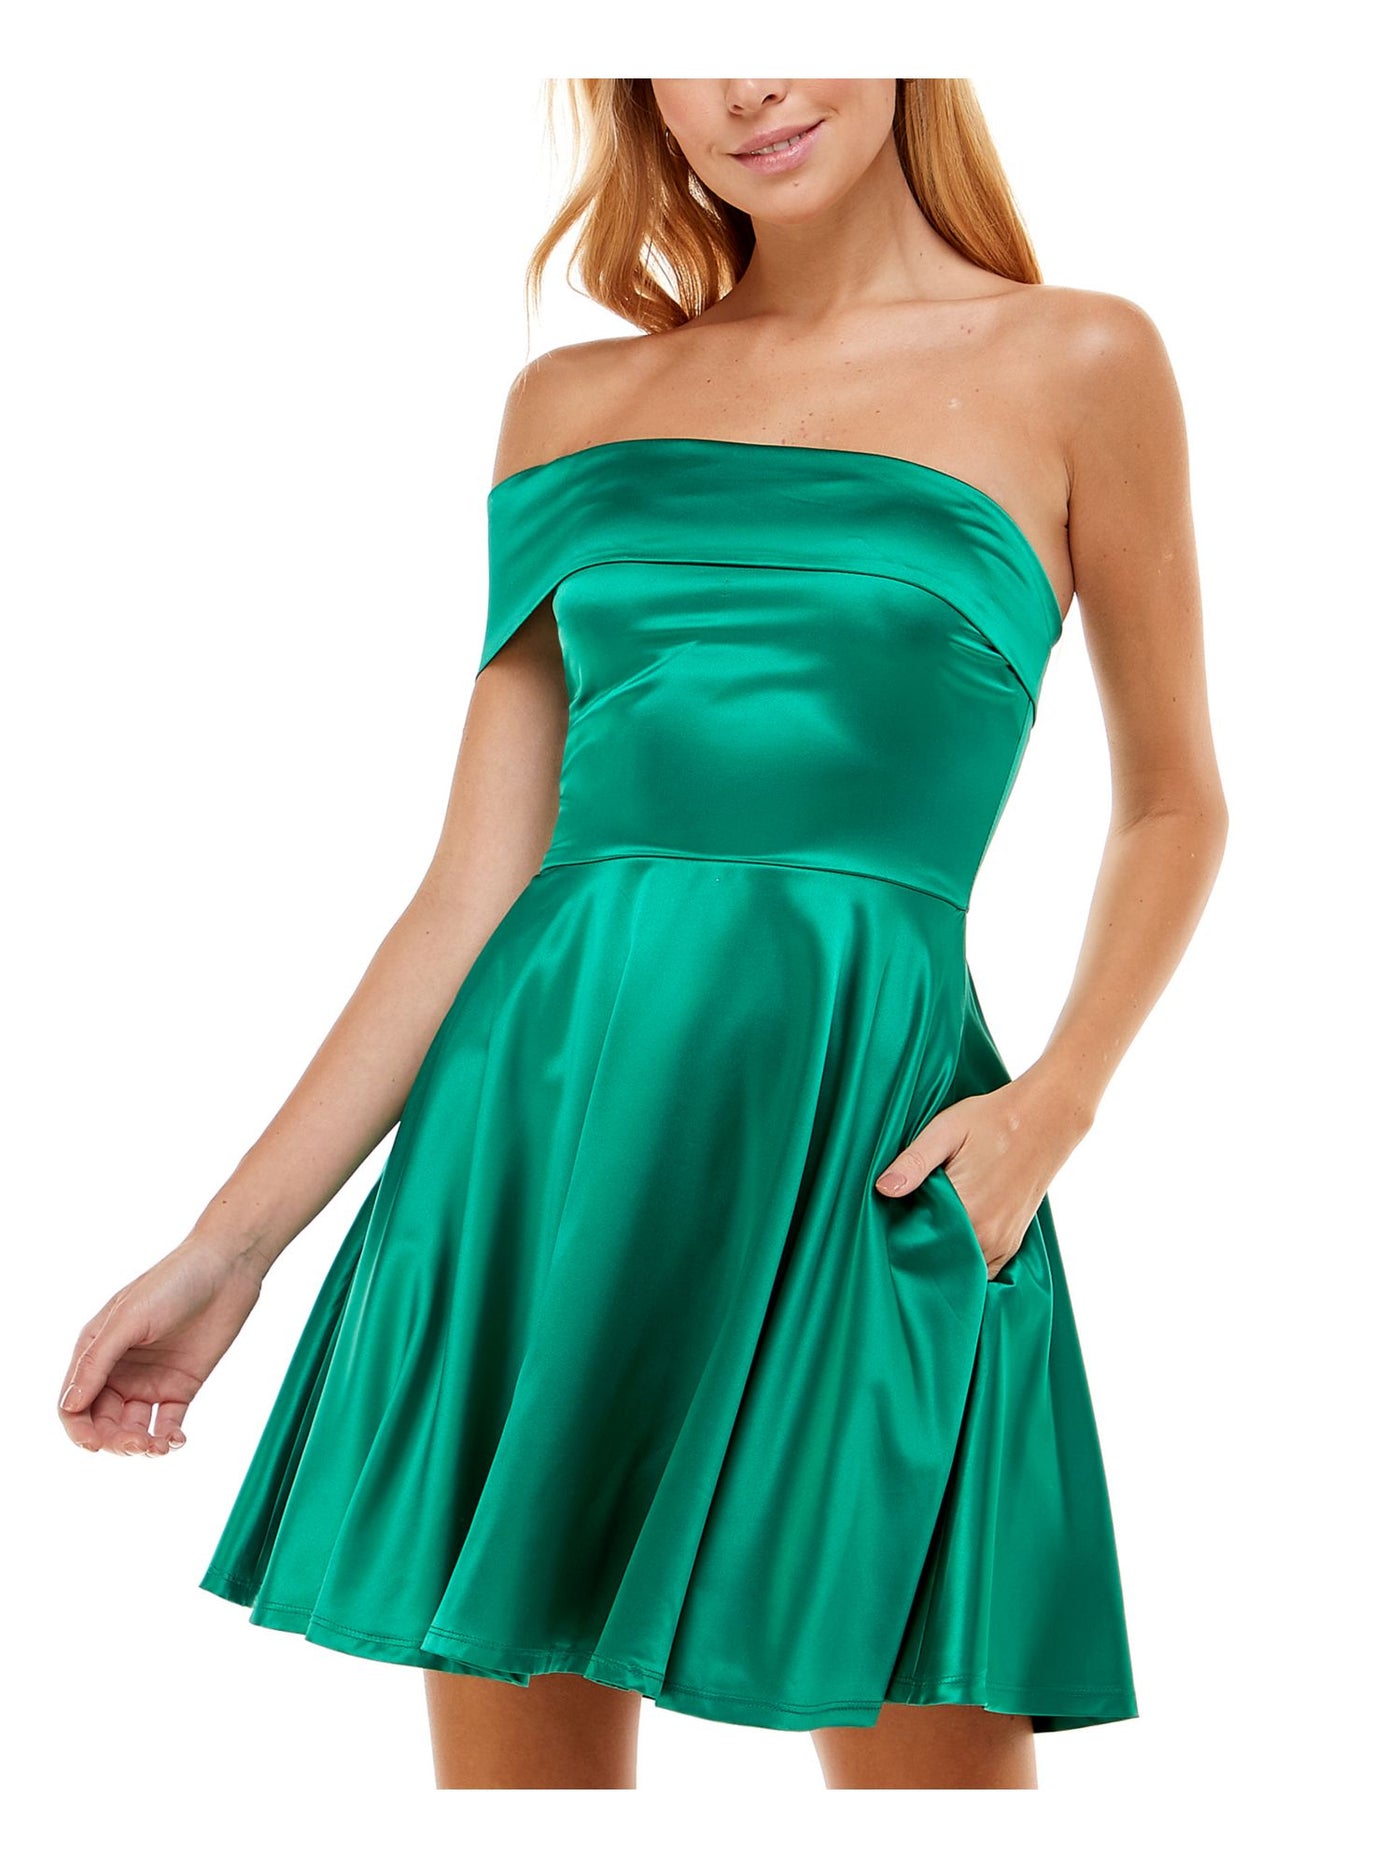 CITY STUDIO Womens Green Stretch Zippered Darted One Shoulder Sleeveless Off Shoulder Short Party Fit + Flare Dress Juniors 17